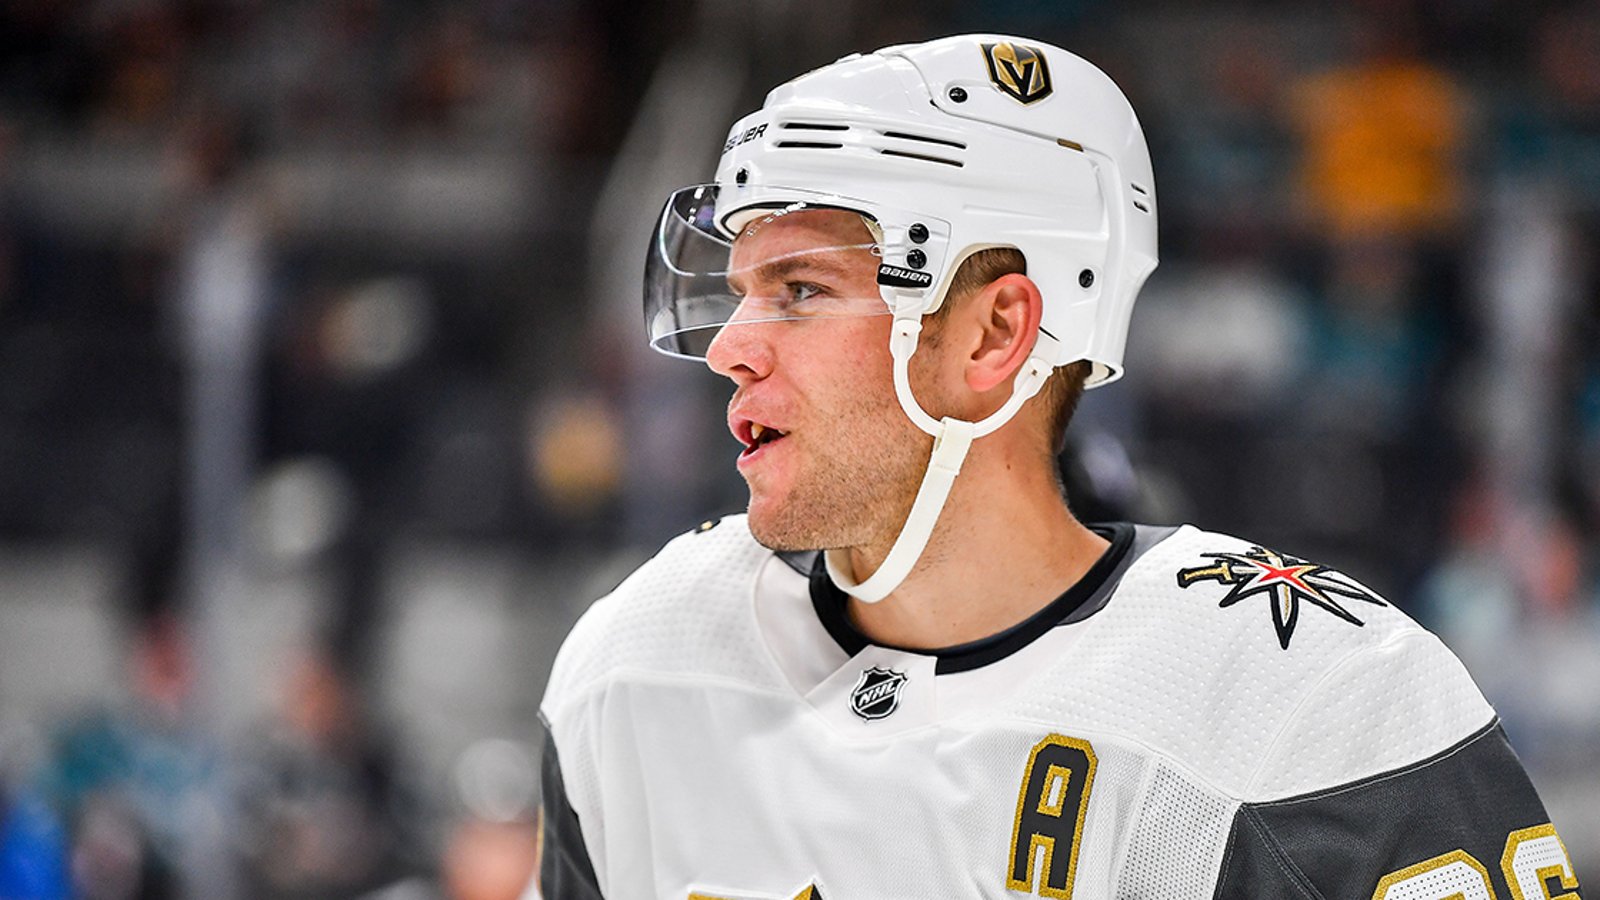 The worst is confirmed for Vegas’ Stastny